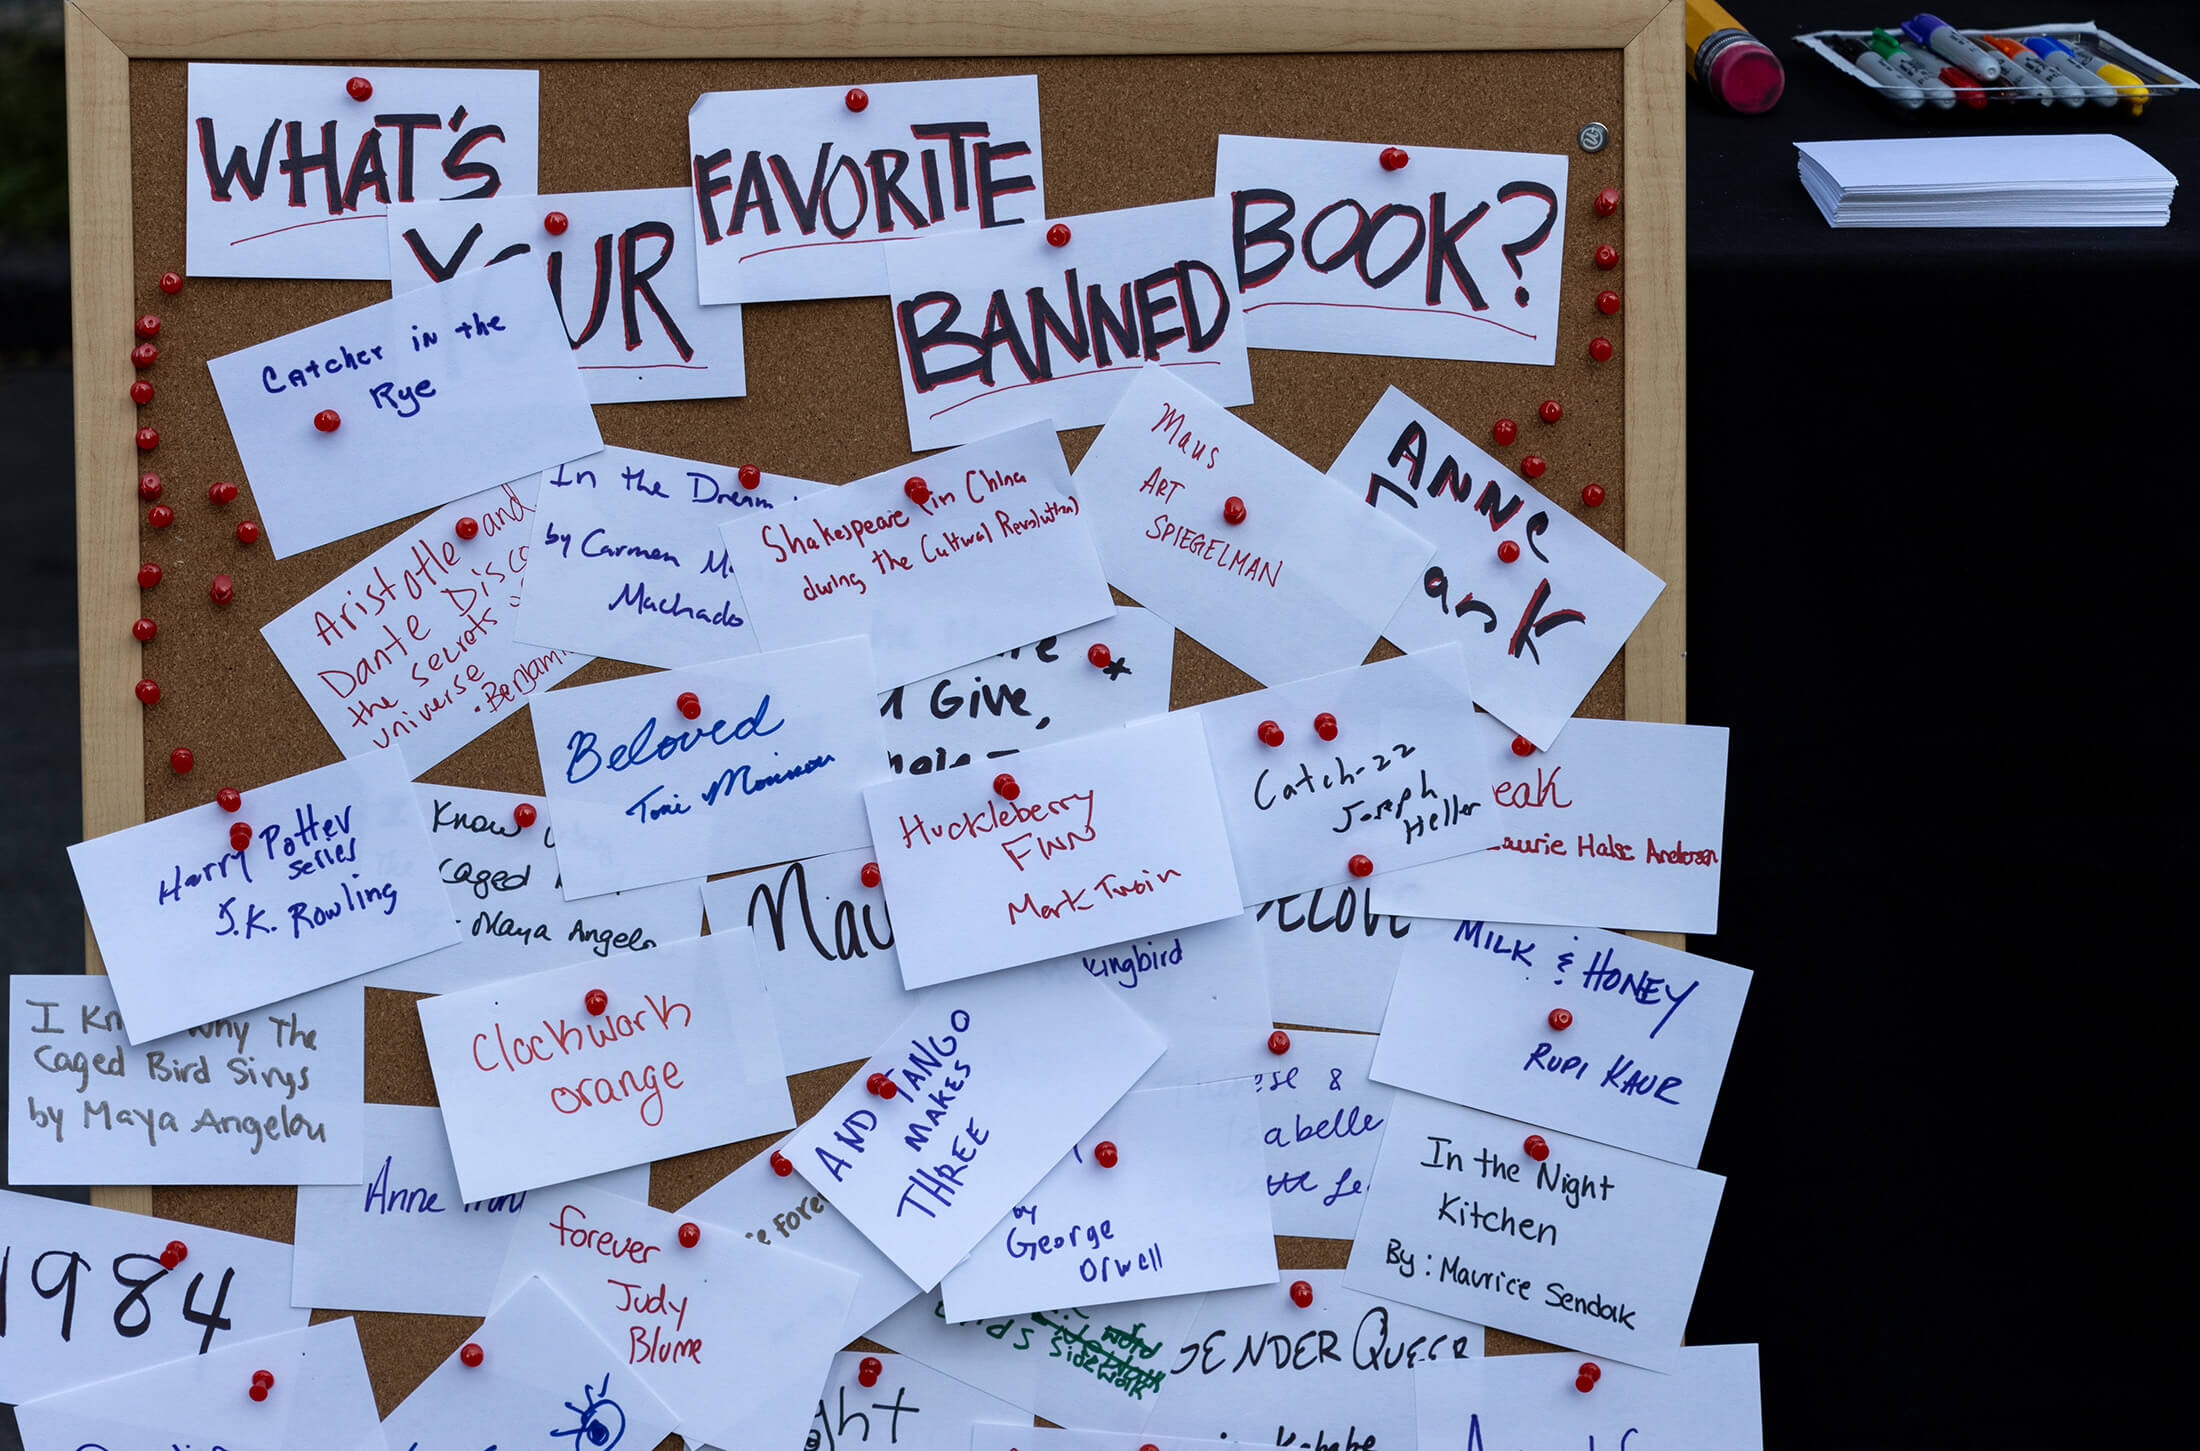 a bulletin board pinned with handwritten notes about peoples favorite banned books